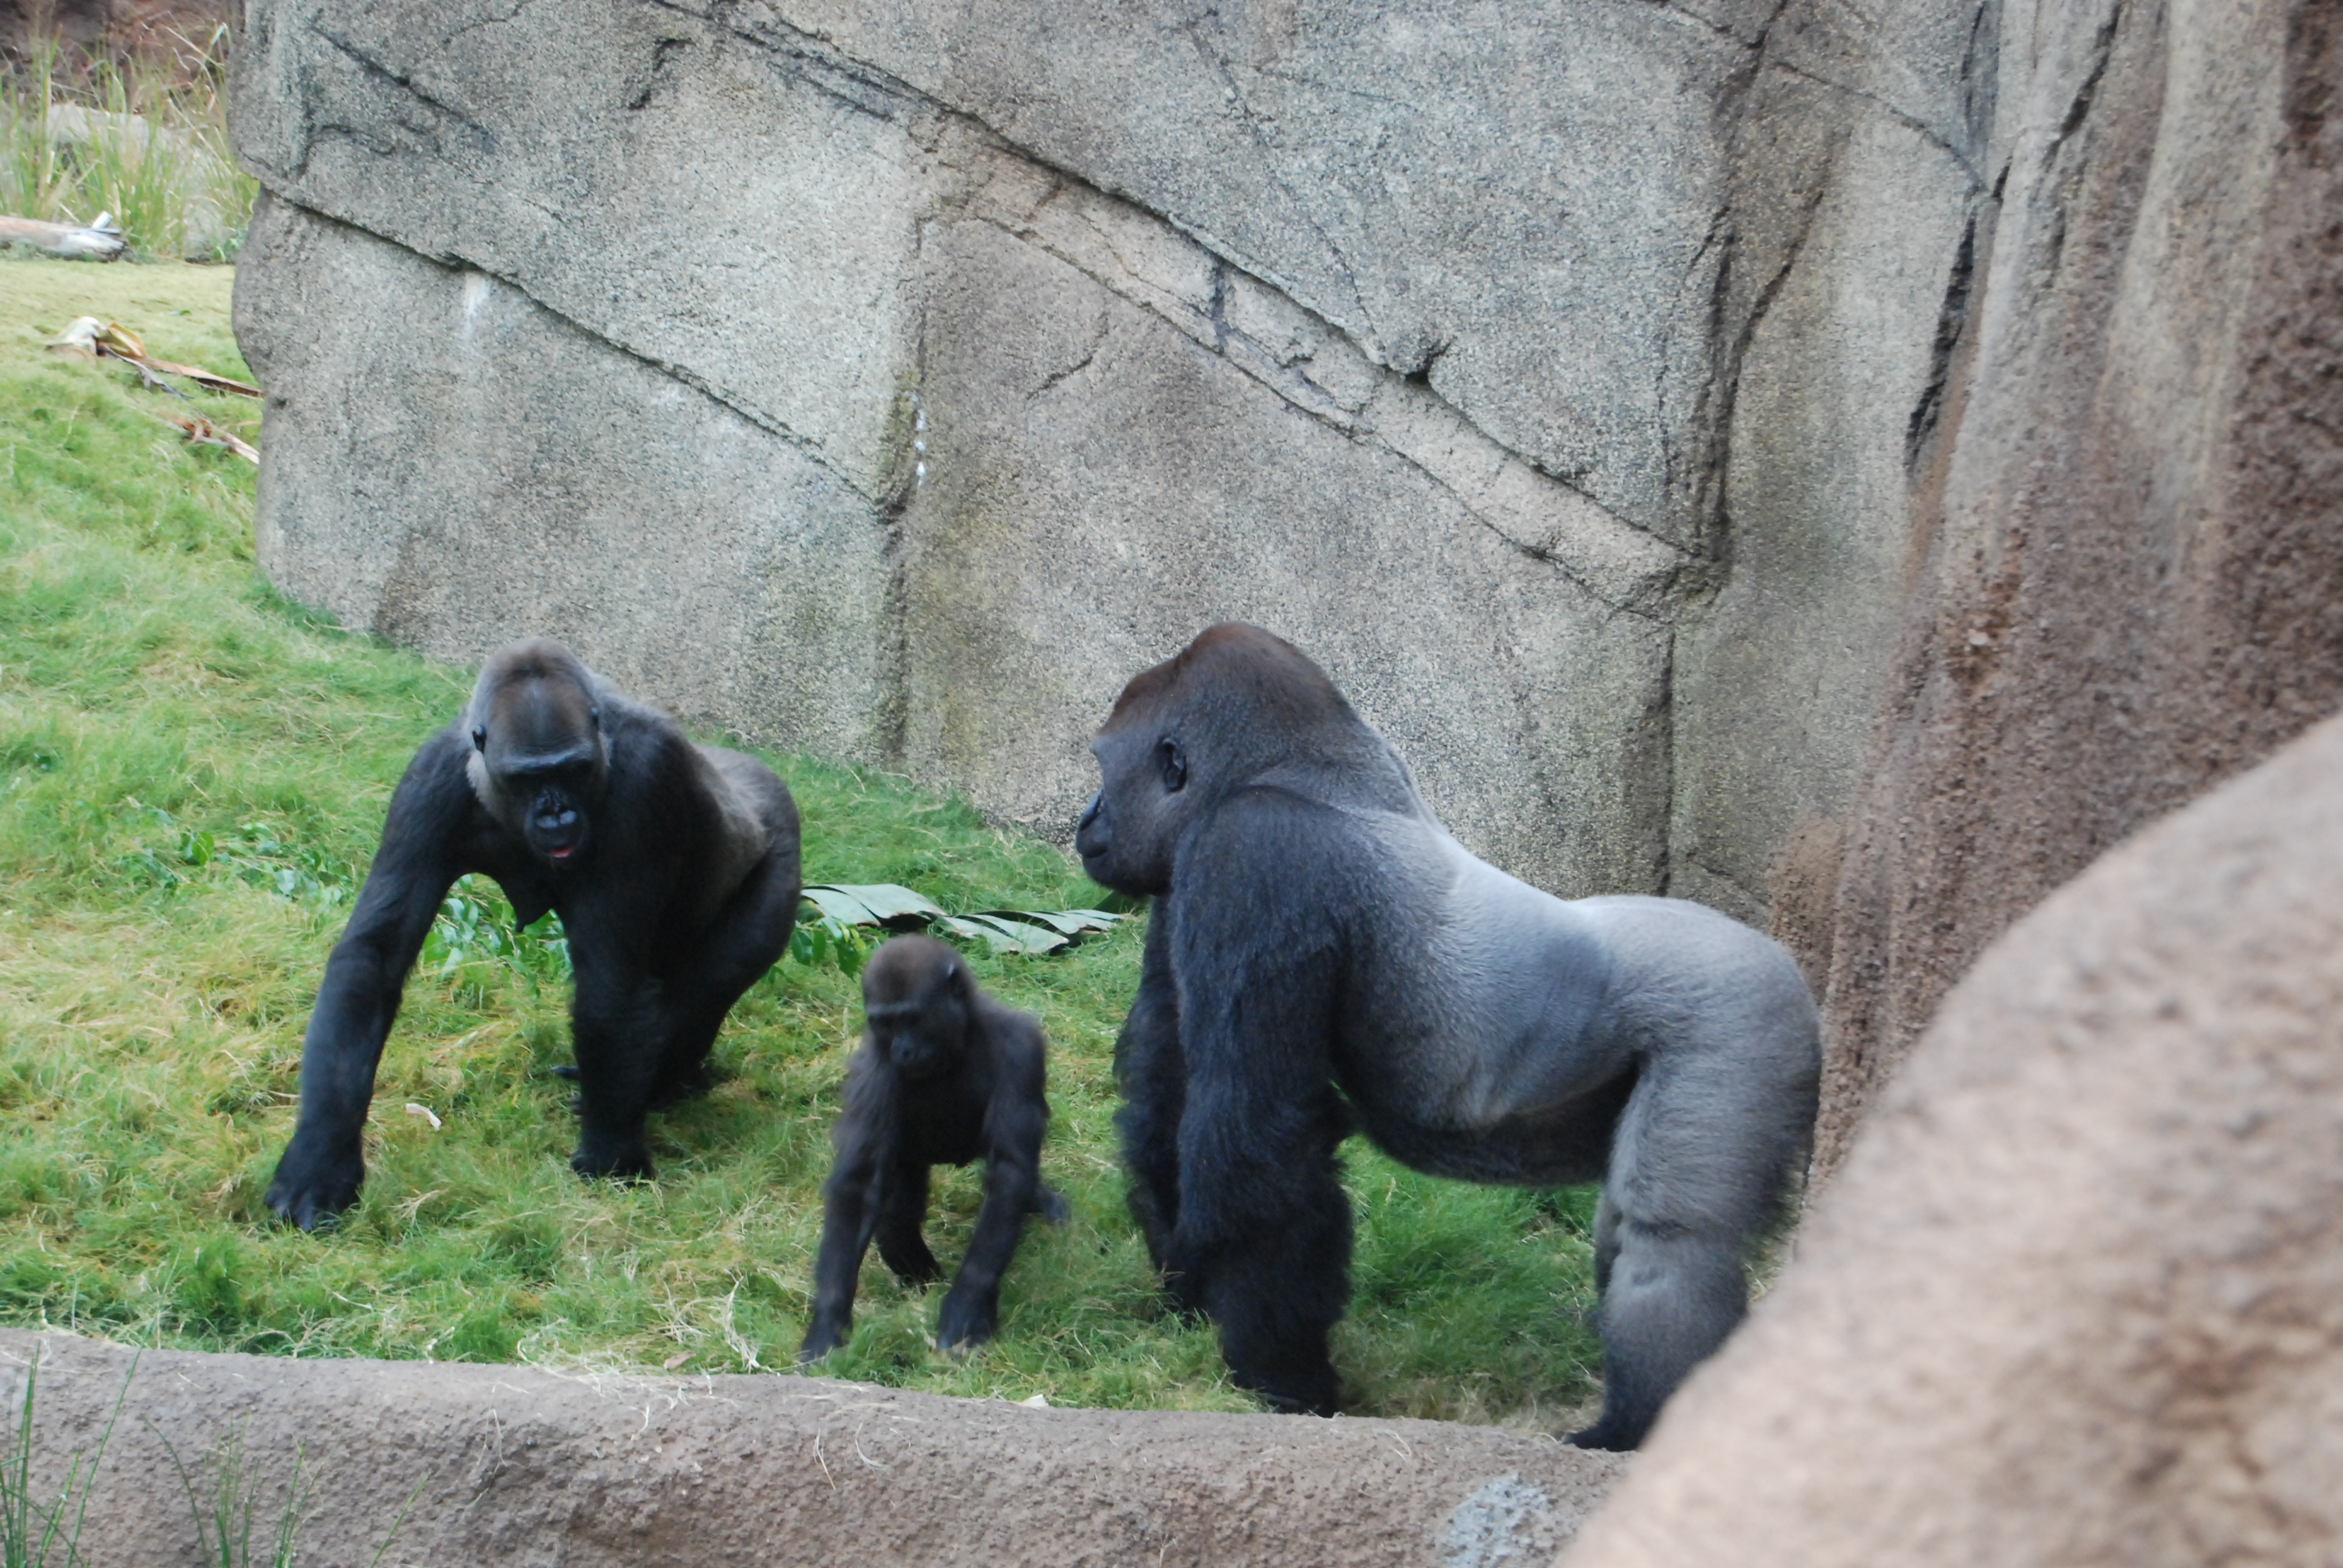 Two-year-old Glenda explores her new habitat with mother Rapunzel (left) and father Kelly at the L.A. Zoo's Campo Gorilla Reserve, which opened to the public November 8.